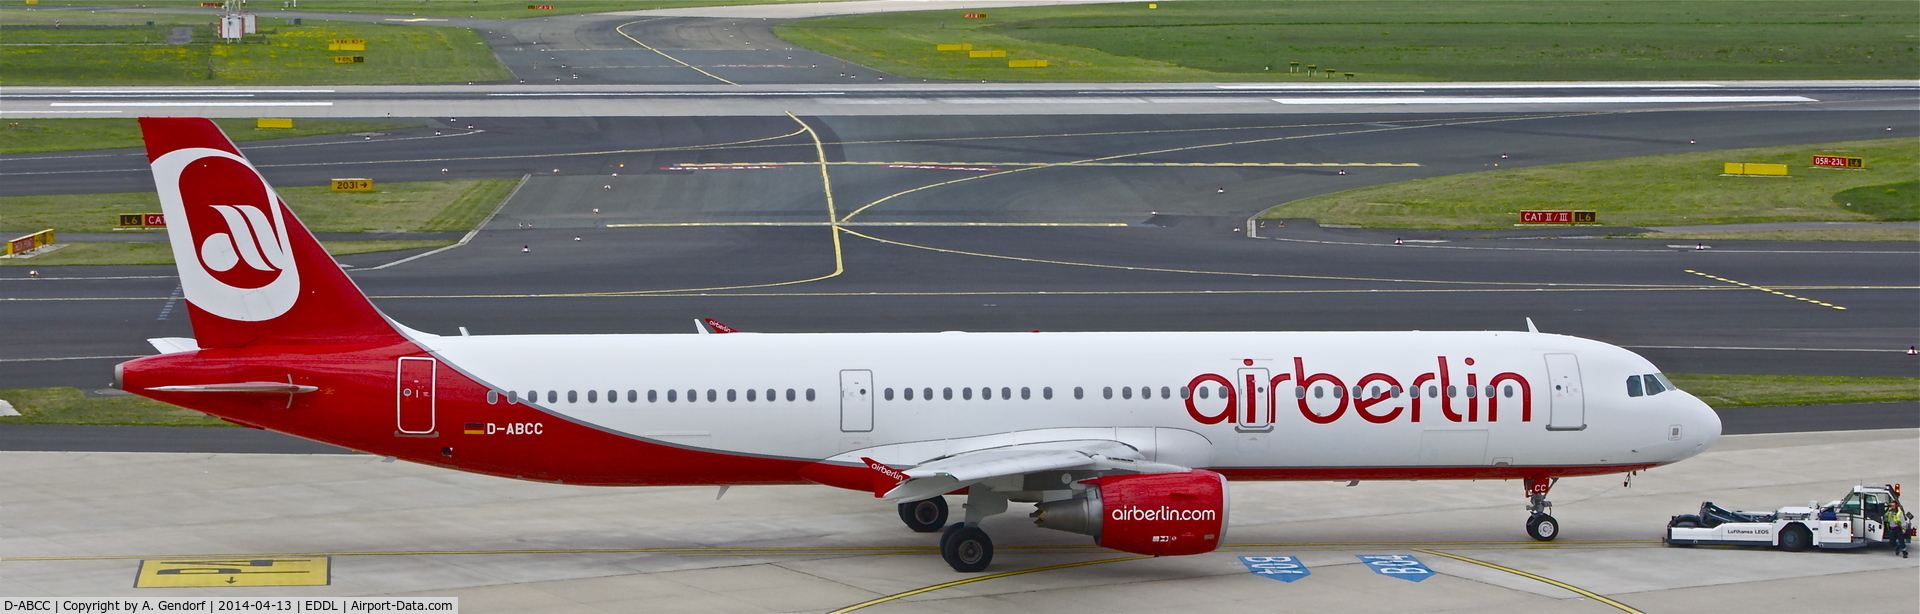 D-ABCC, 2010 Airbus A321-211 C/N 4334, Air Berlin, is here shortly after pushback at Düsseldorf Int'l(EDDL)